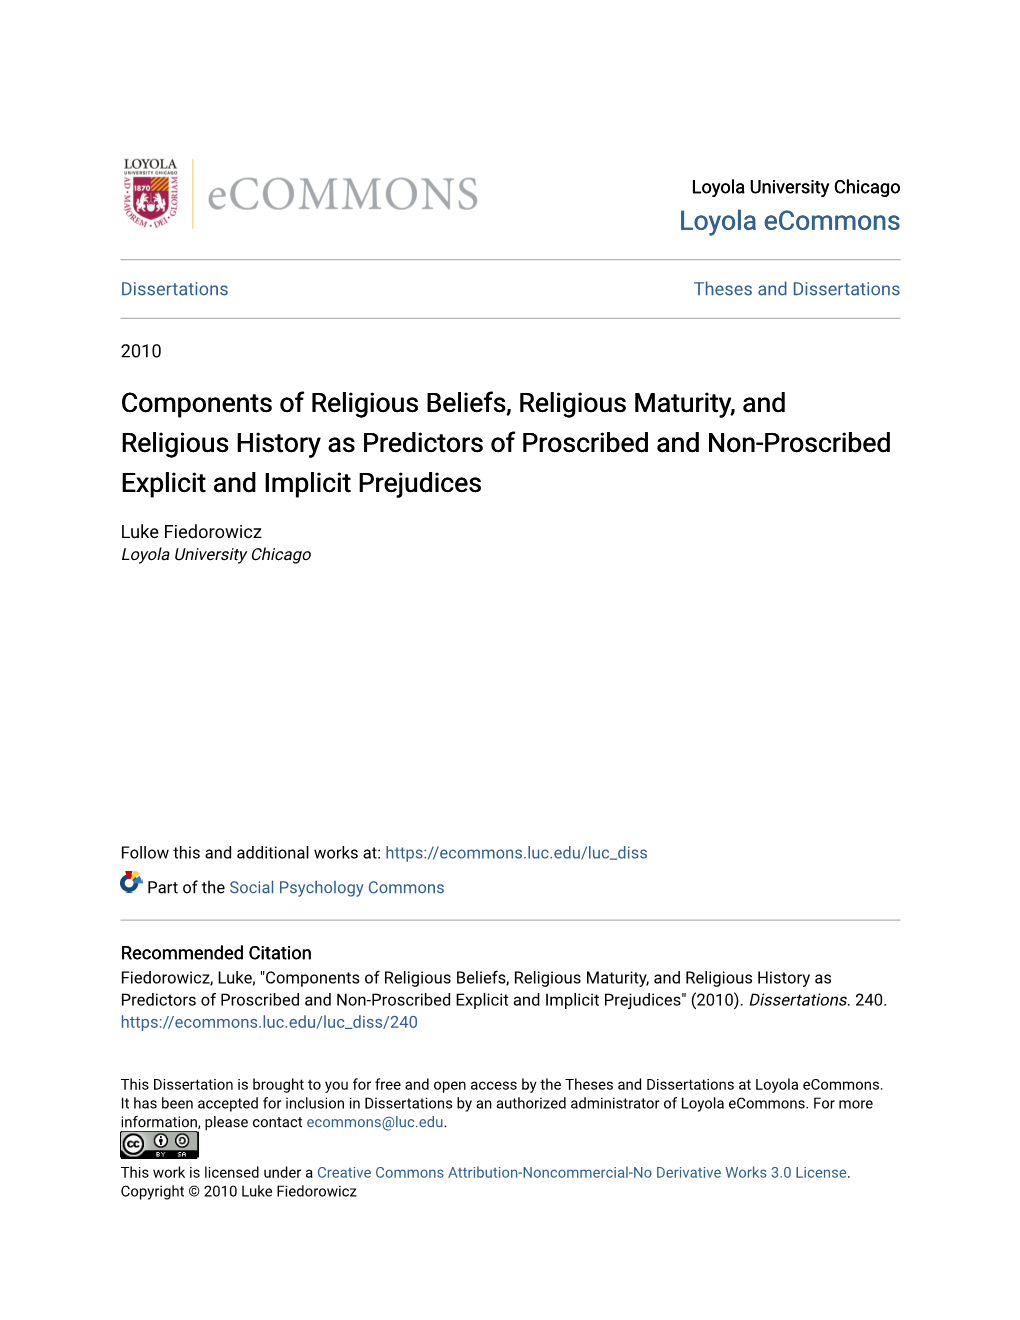 Components of Religious Beliefs, Religious Maturity, and Religious History As Predictors of Proscribed and Non-Proscribed Explicit and Implicit Prejudices